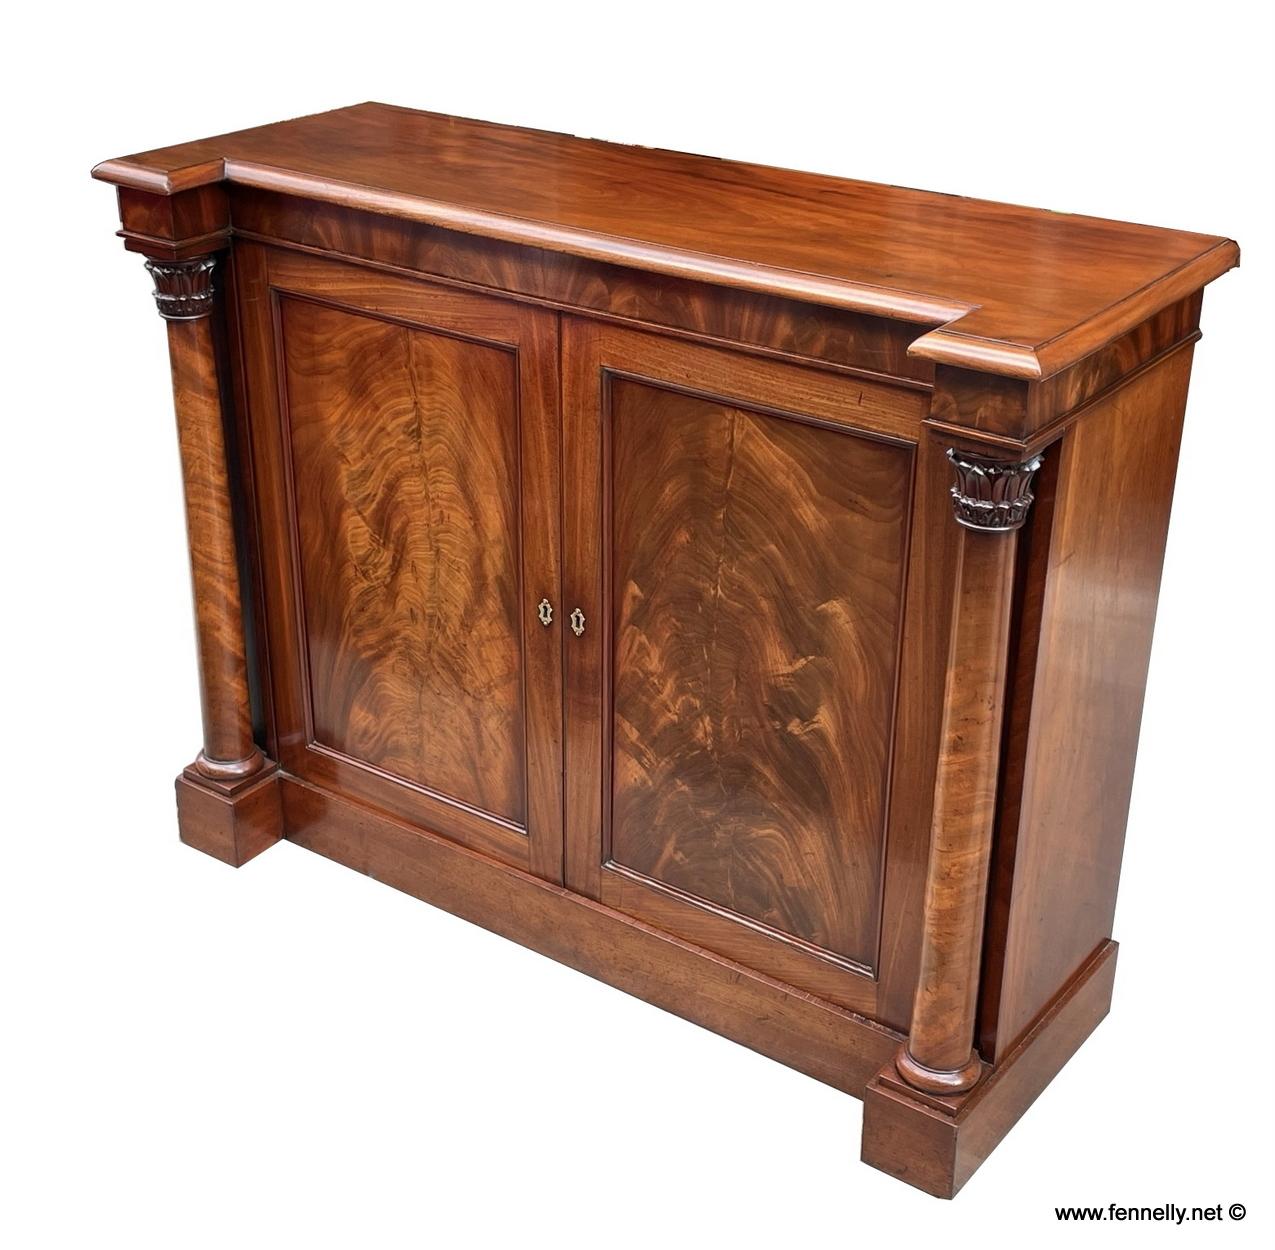 An imposing Irish flame mahogany twin door Chiffonier side cabinet of good size proportions. Made in Dublin by renowned furniture makers Mac, Williams and Gibton. Stafford Street, Dublin. First quarter of the Nineteenth Century. 

The rectangular